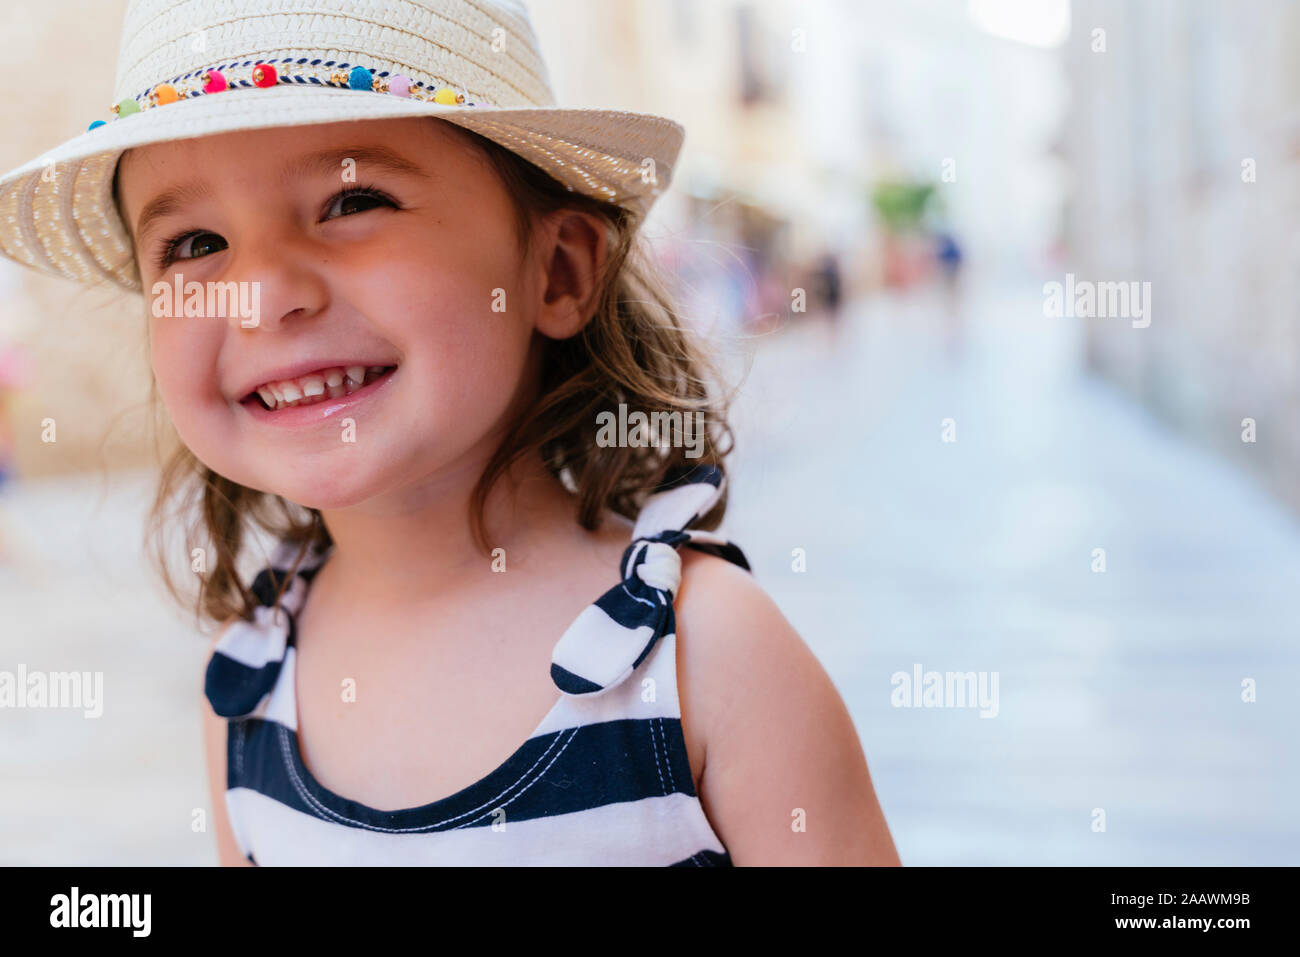 Portrait of laughing little girl wearing straw hat Stock Photo